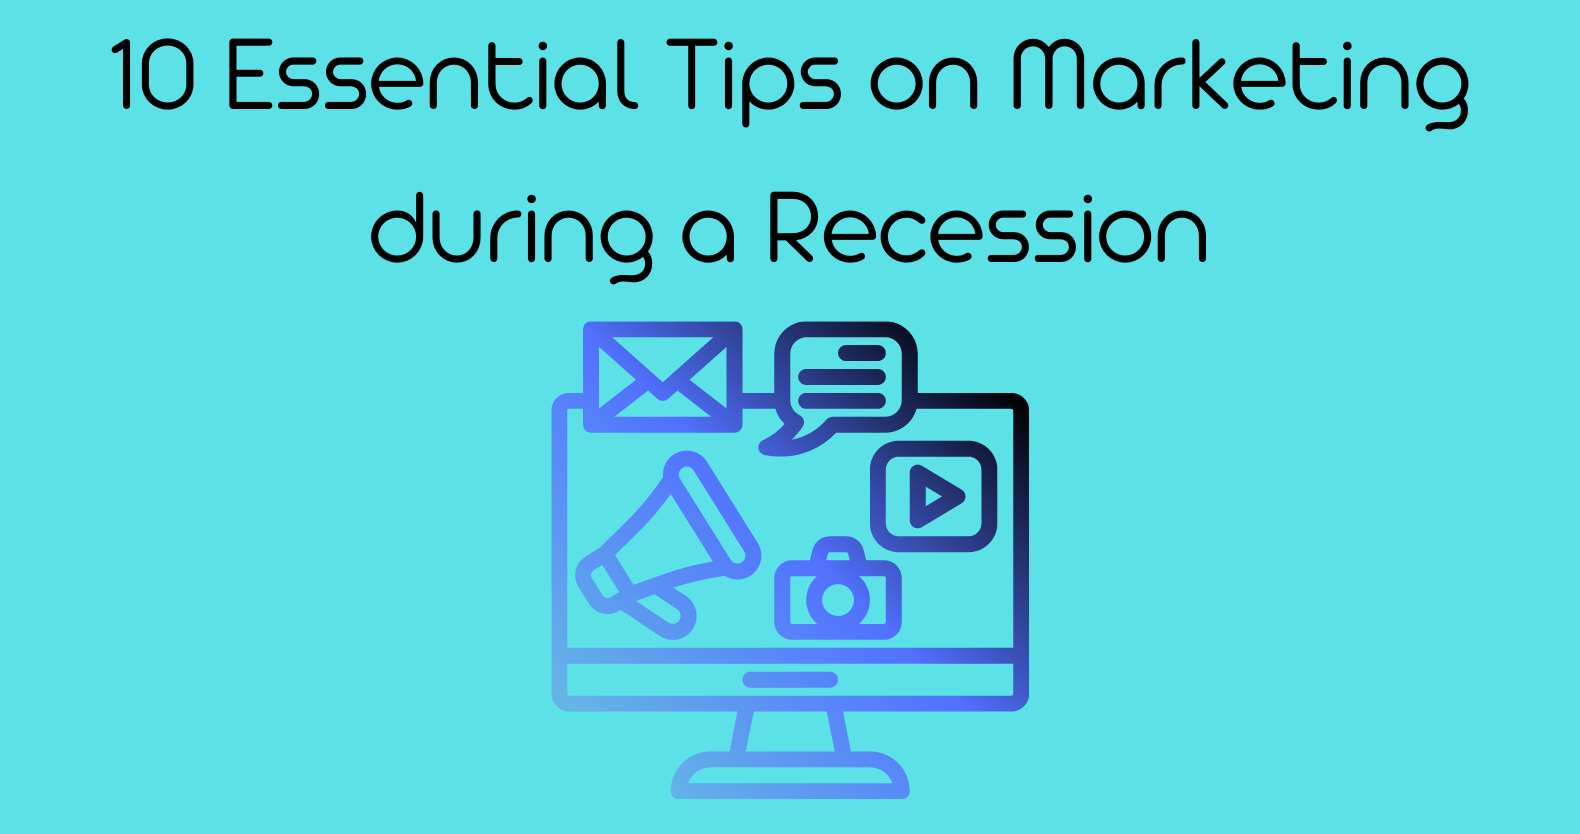 10 Essential Tips on Marketing during a Recession